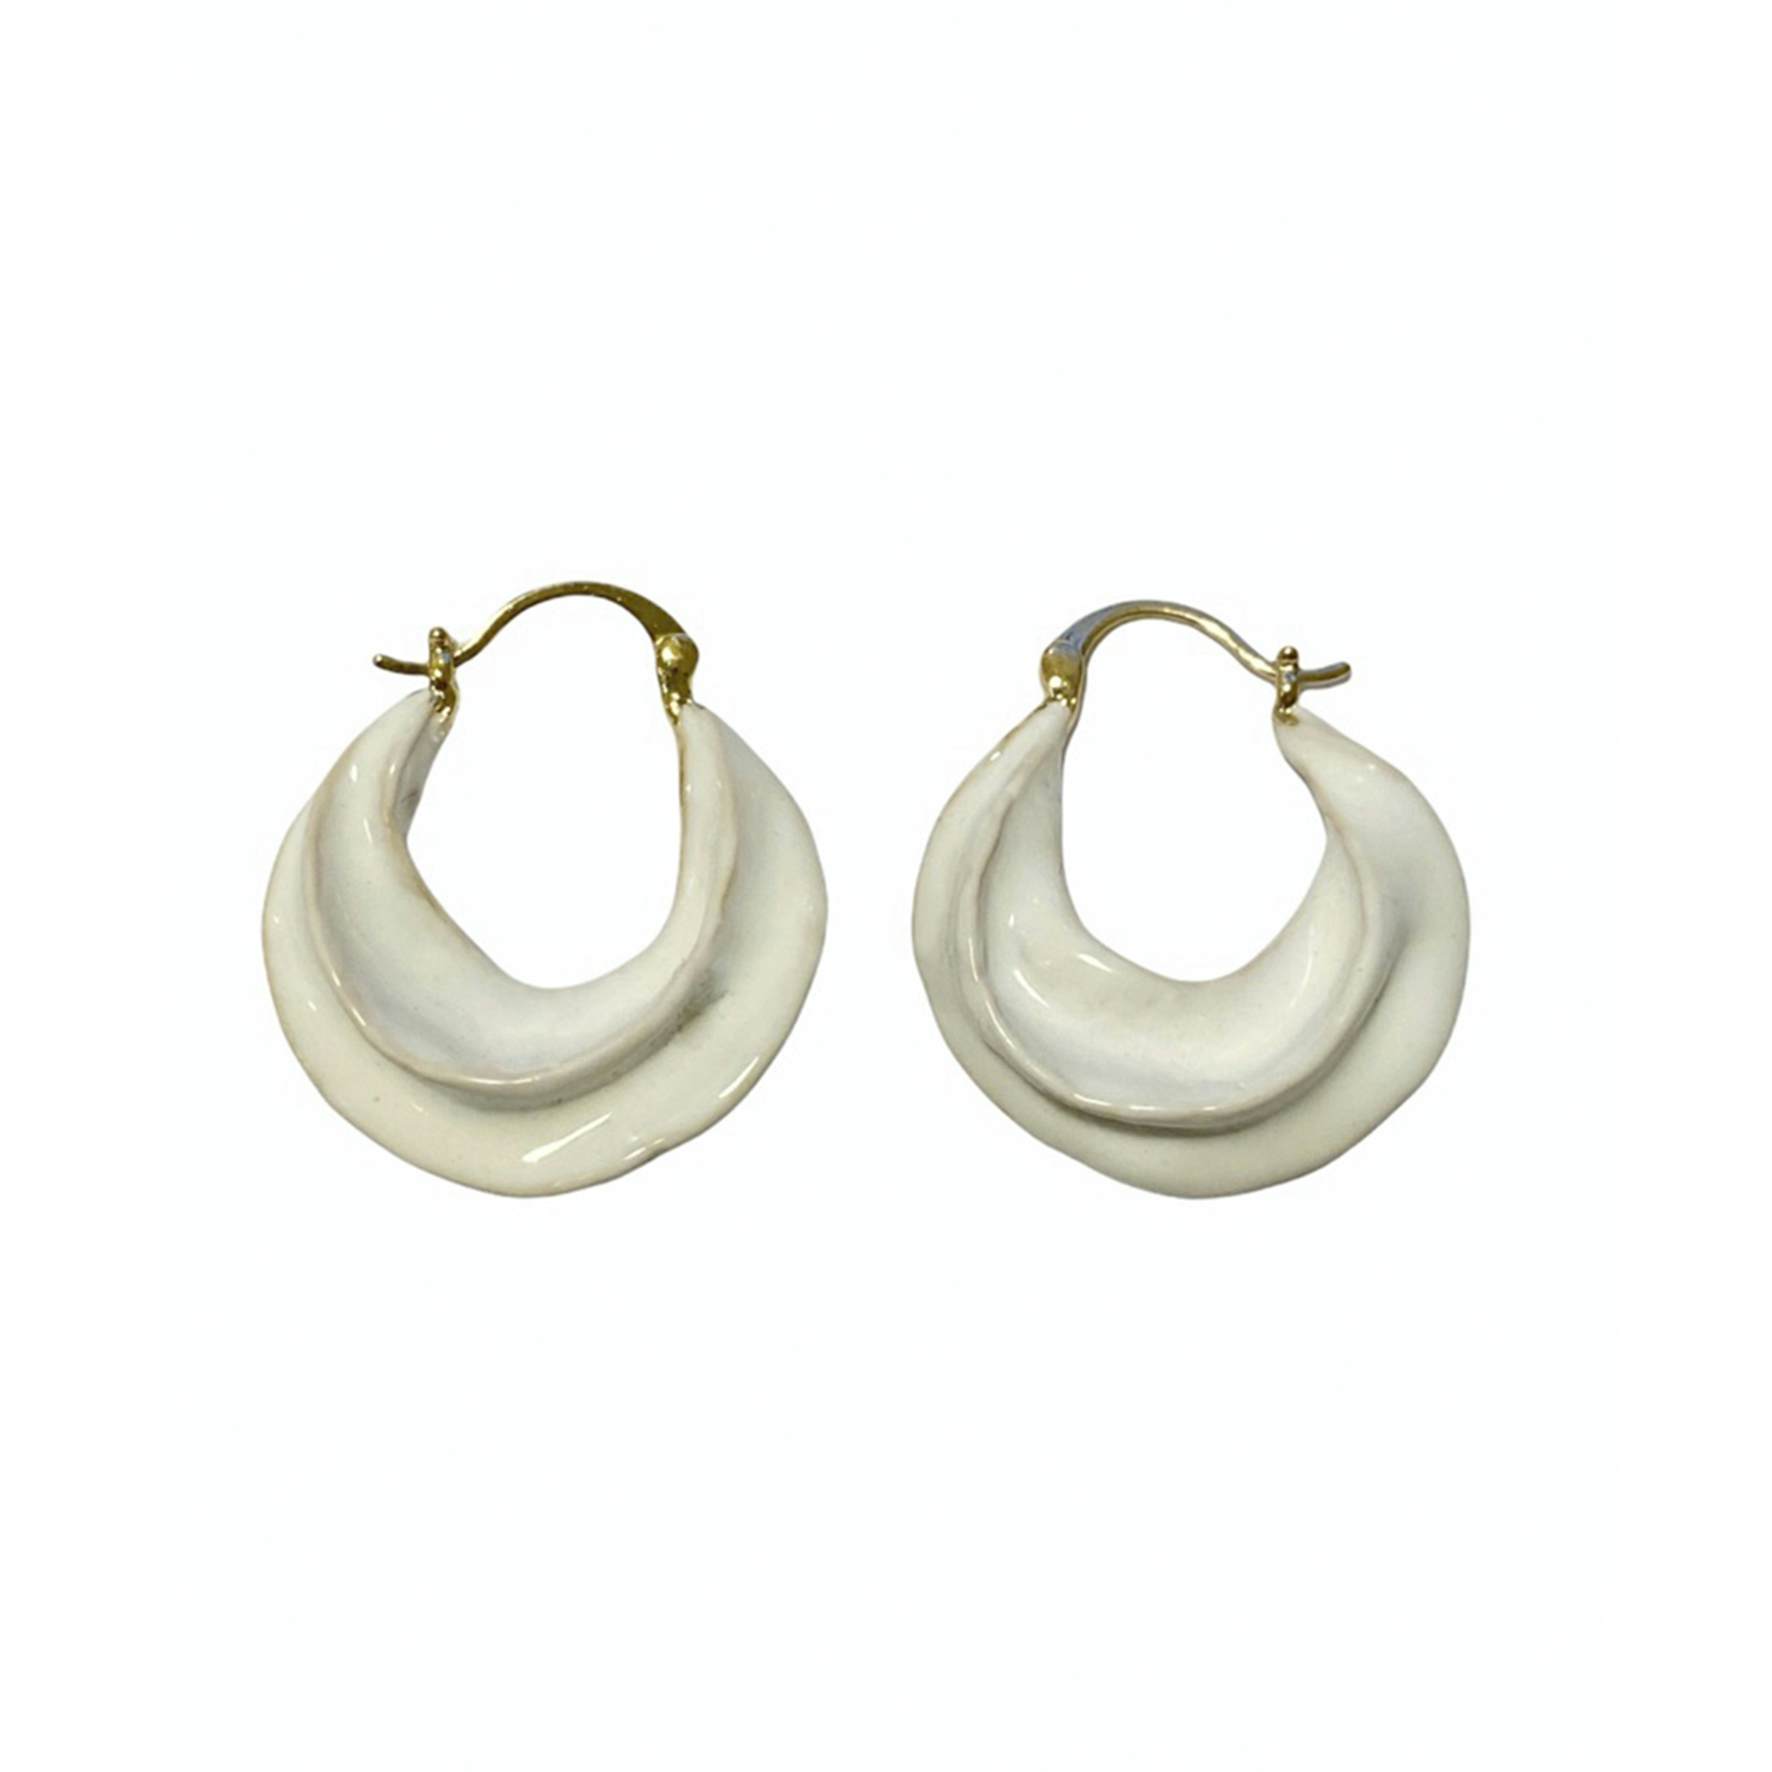 Africa Enamel Earrings White from Pico in Goldplated-Silver Sterling 925